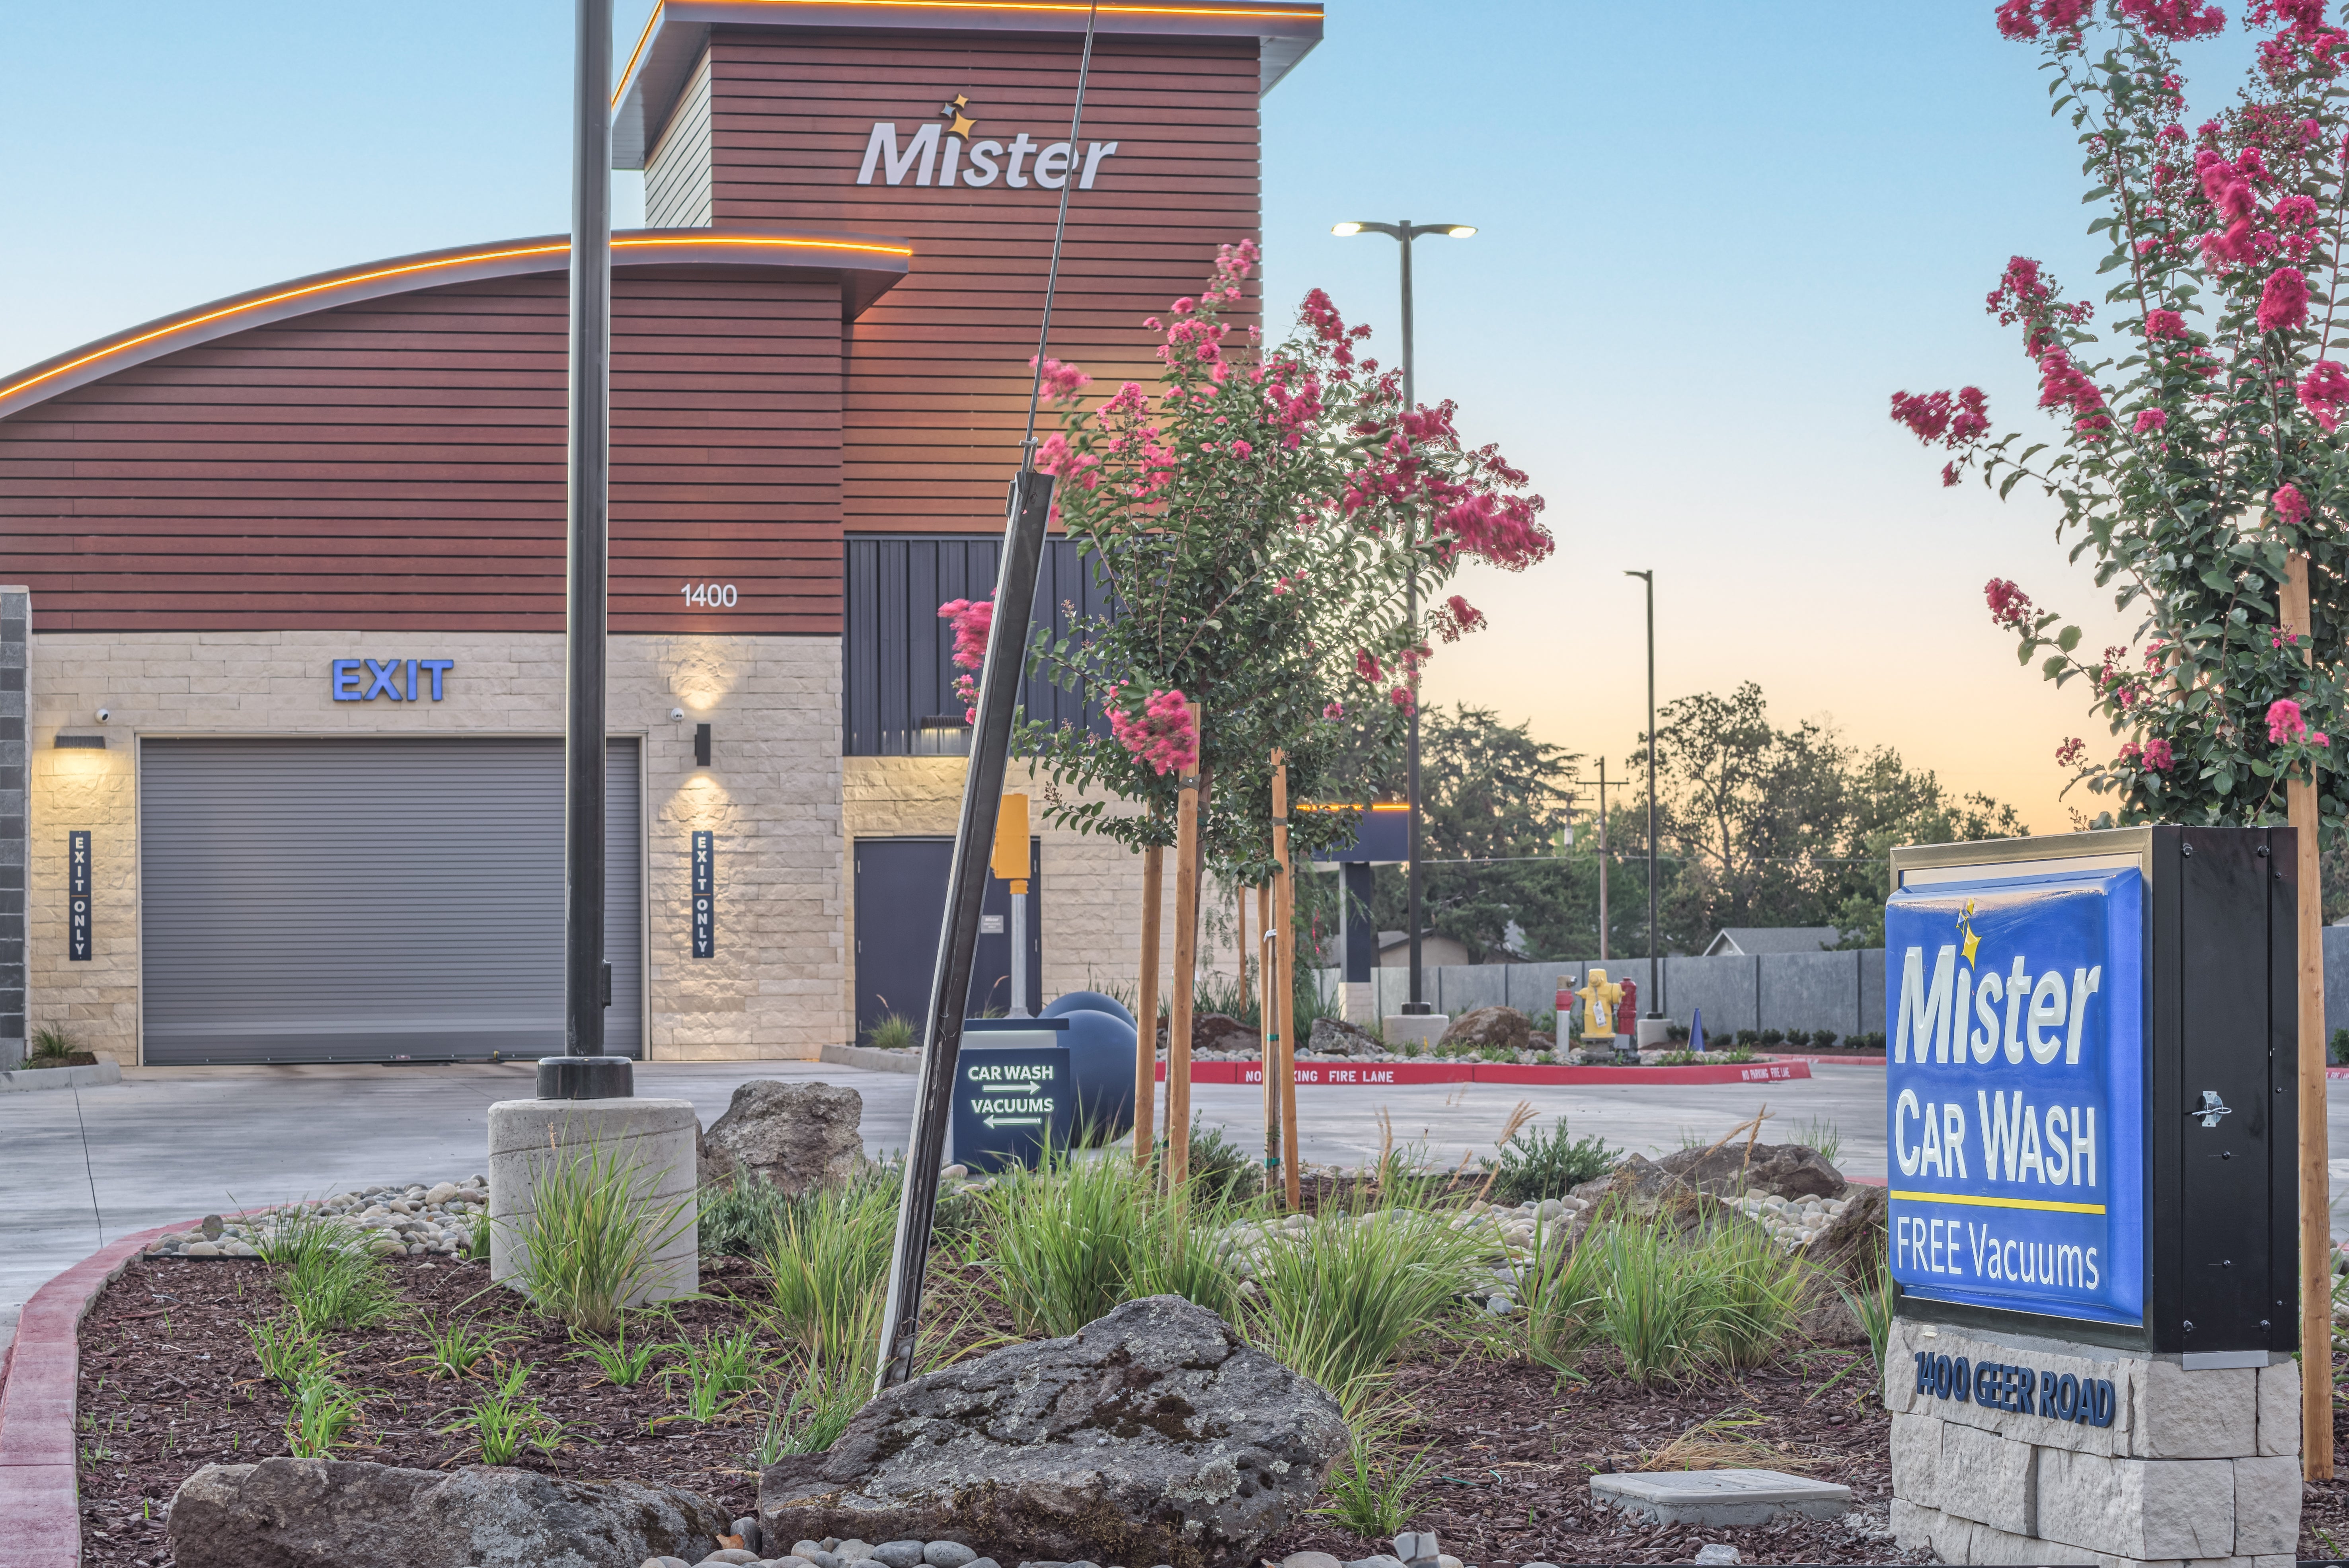 Mister Car Wash Expands Presence in California’s Central Valley with Two New Locations